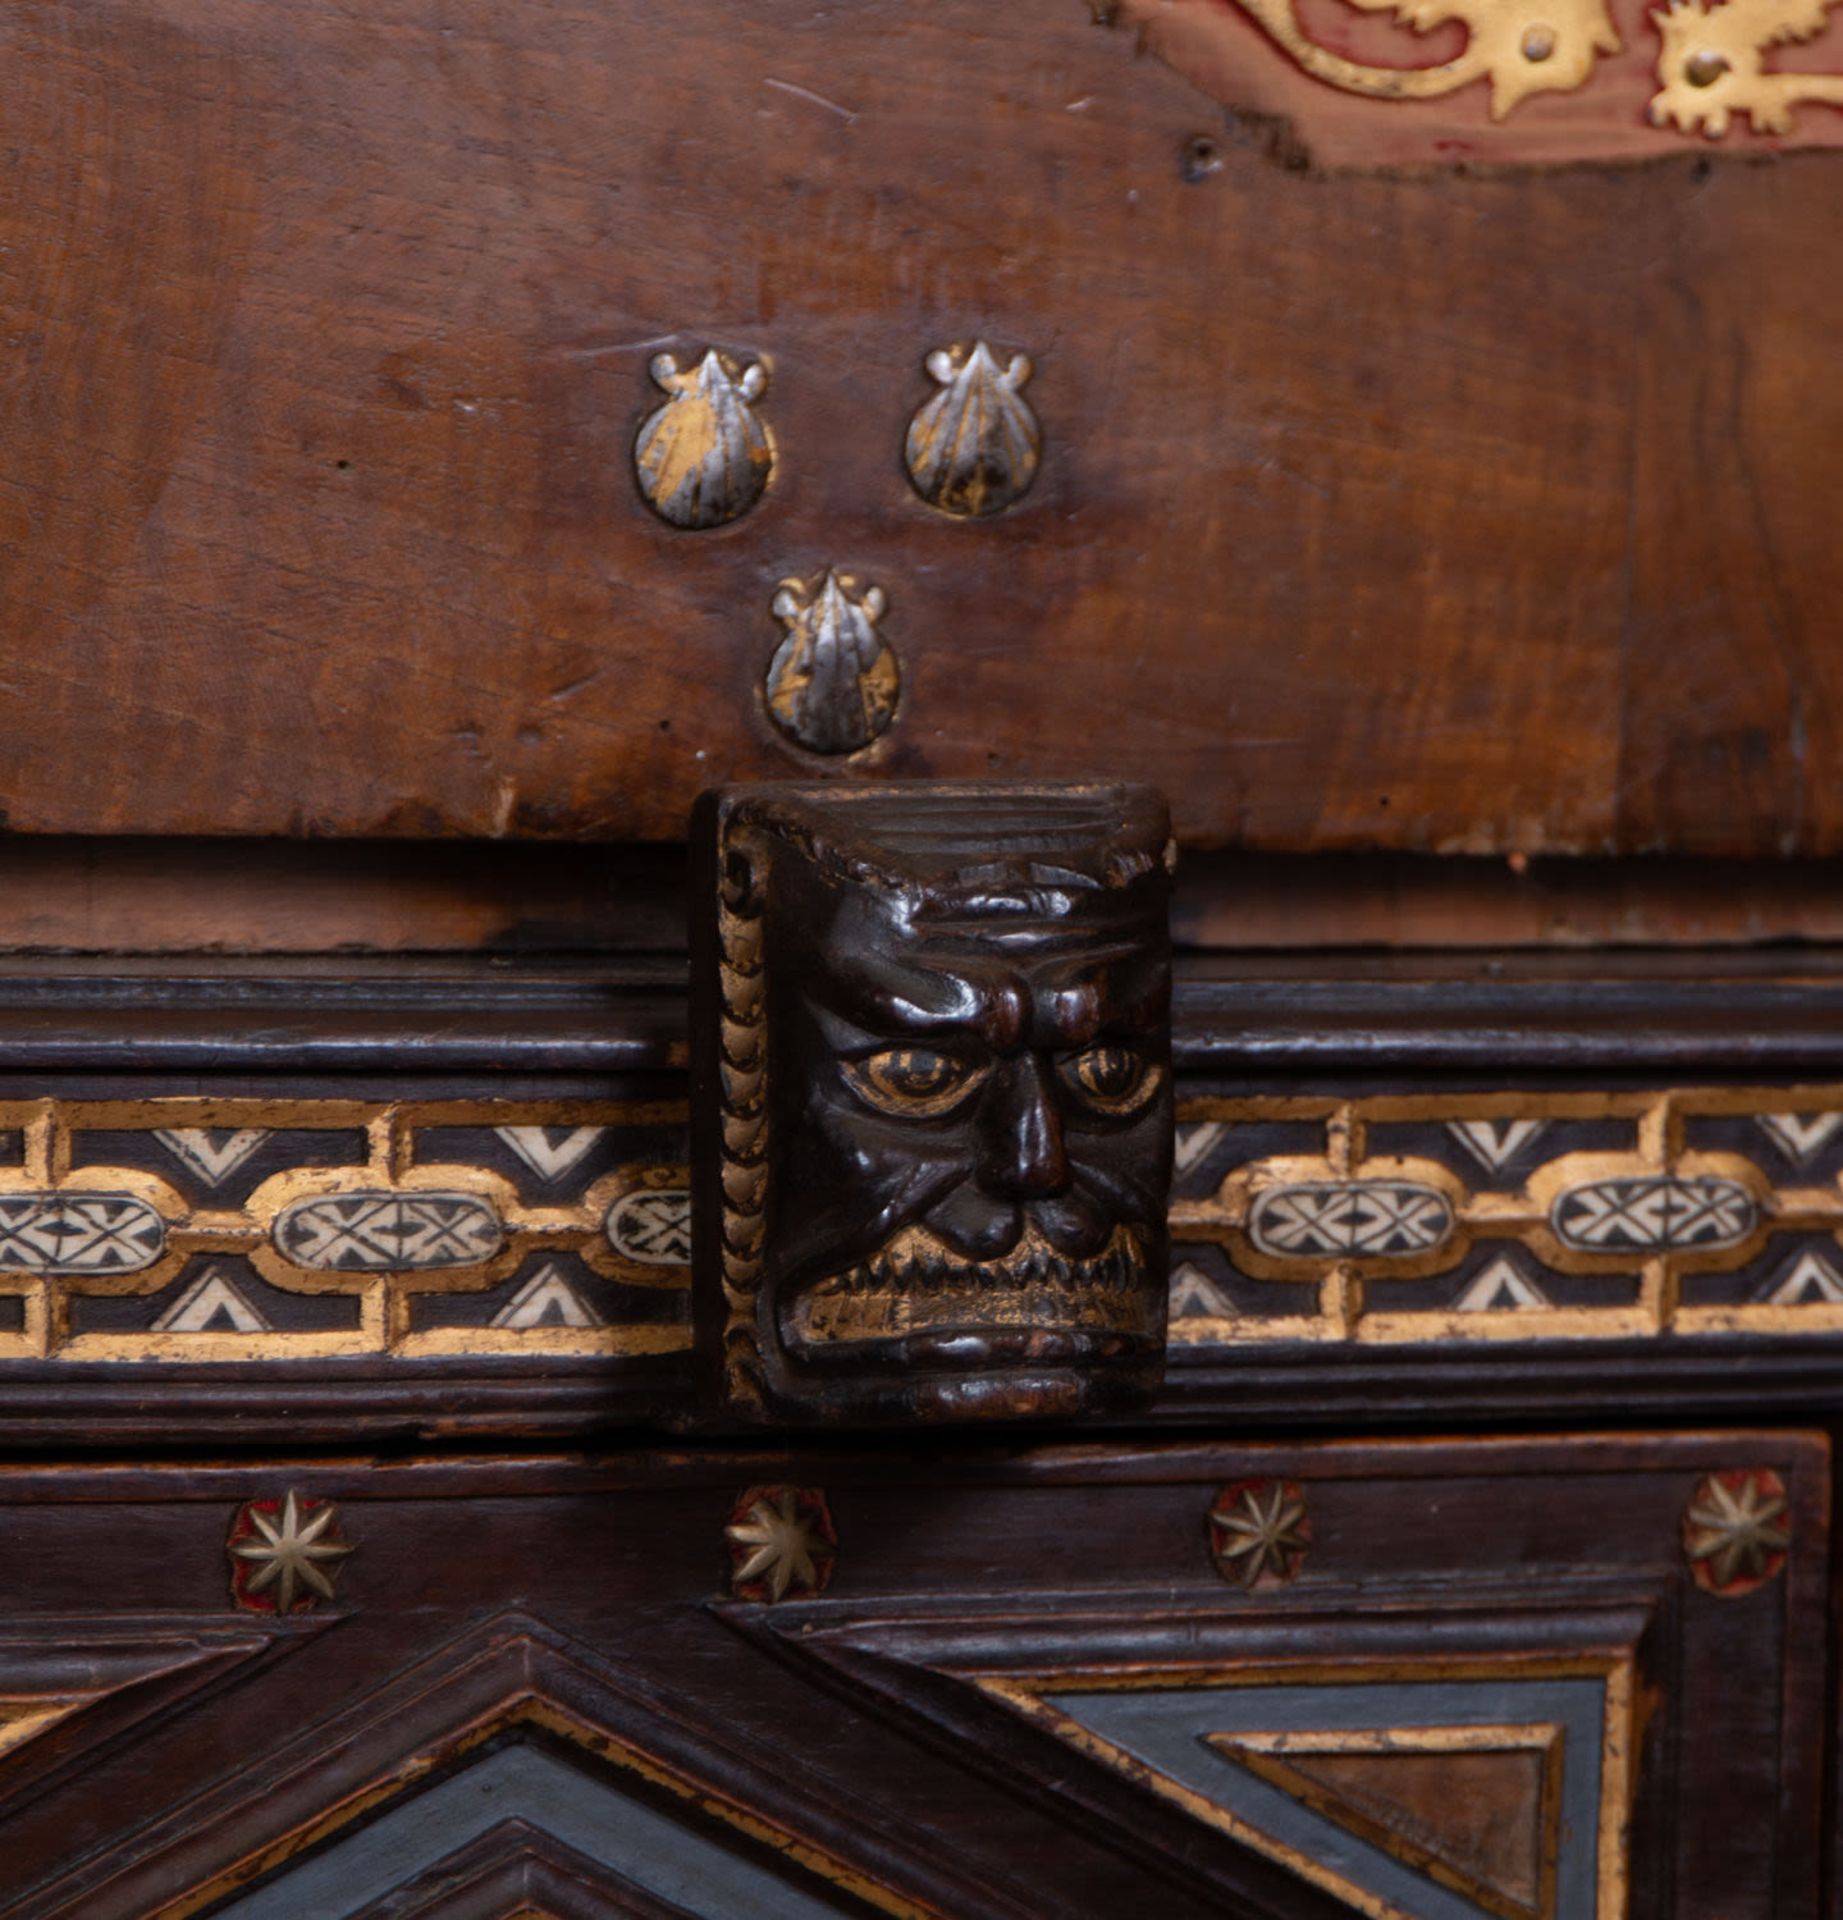 Exceptional Spanish Vargueno Cabinet complete with table, Toledo school of the 17th century - Image 21 of 26